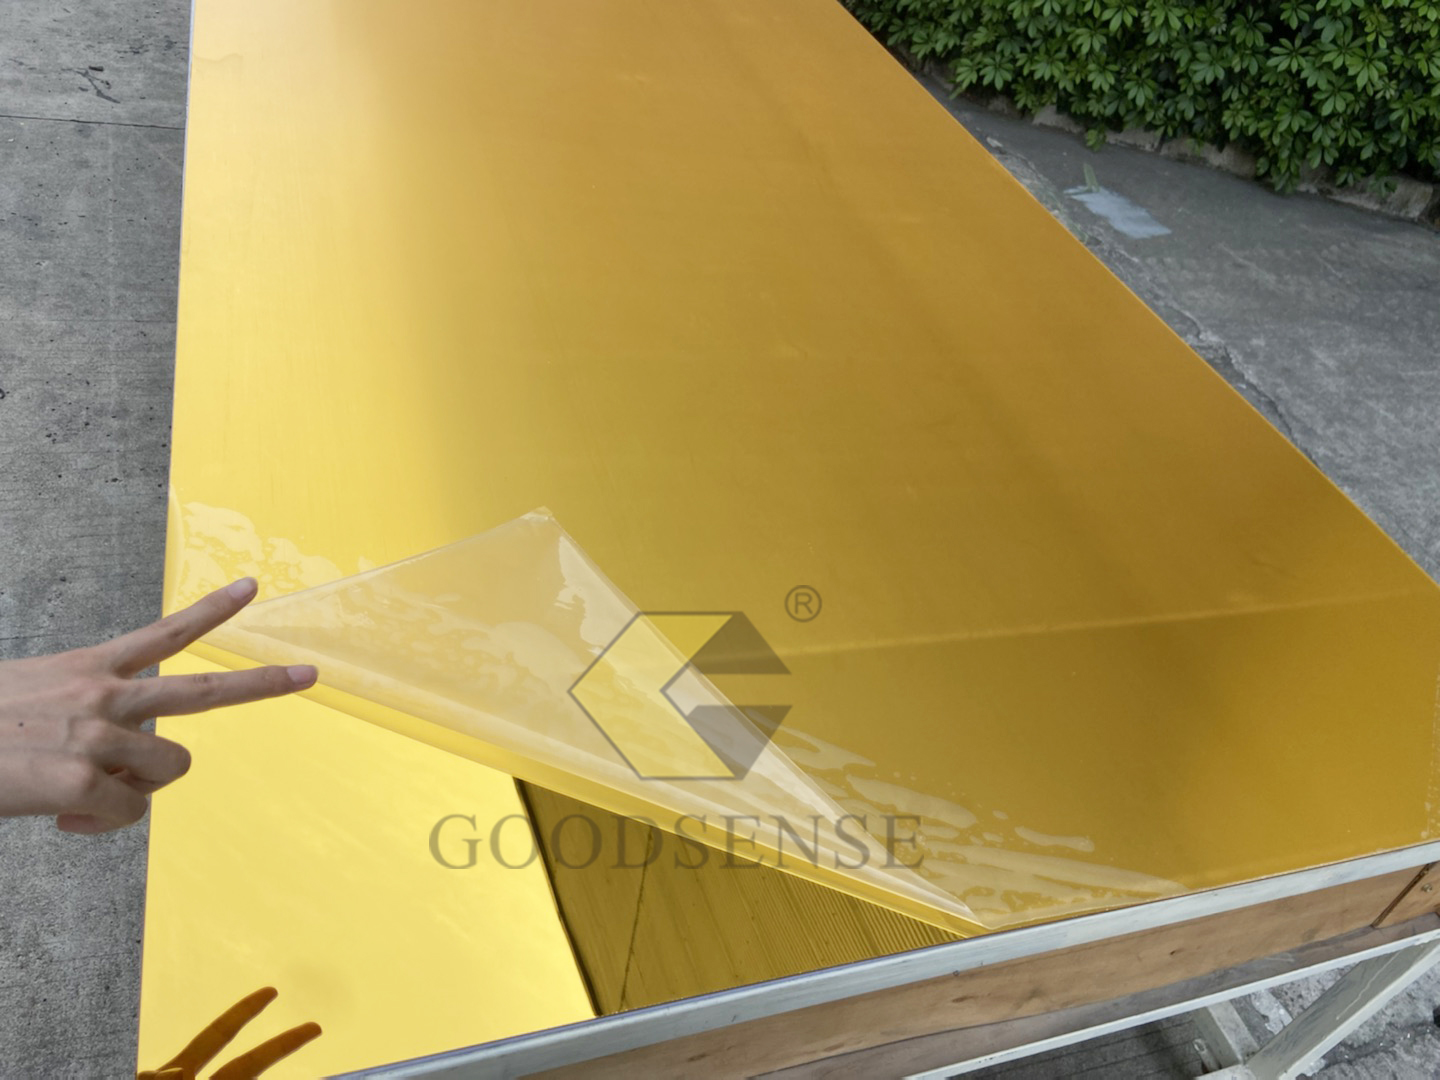 Removable Acryl Lucite Mirror Sheets Thick PMMA Mirror Plexiglass Organic High Gloss Perspex Discs Tiles Mirror China for Cake Topper Goodsense Gold Acrylic Dual Mirror Wholesale